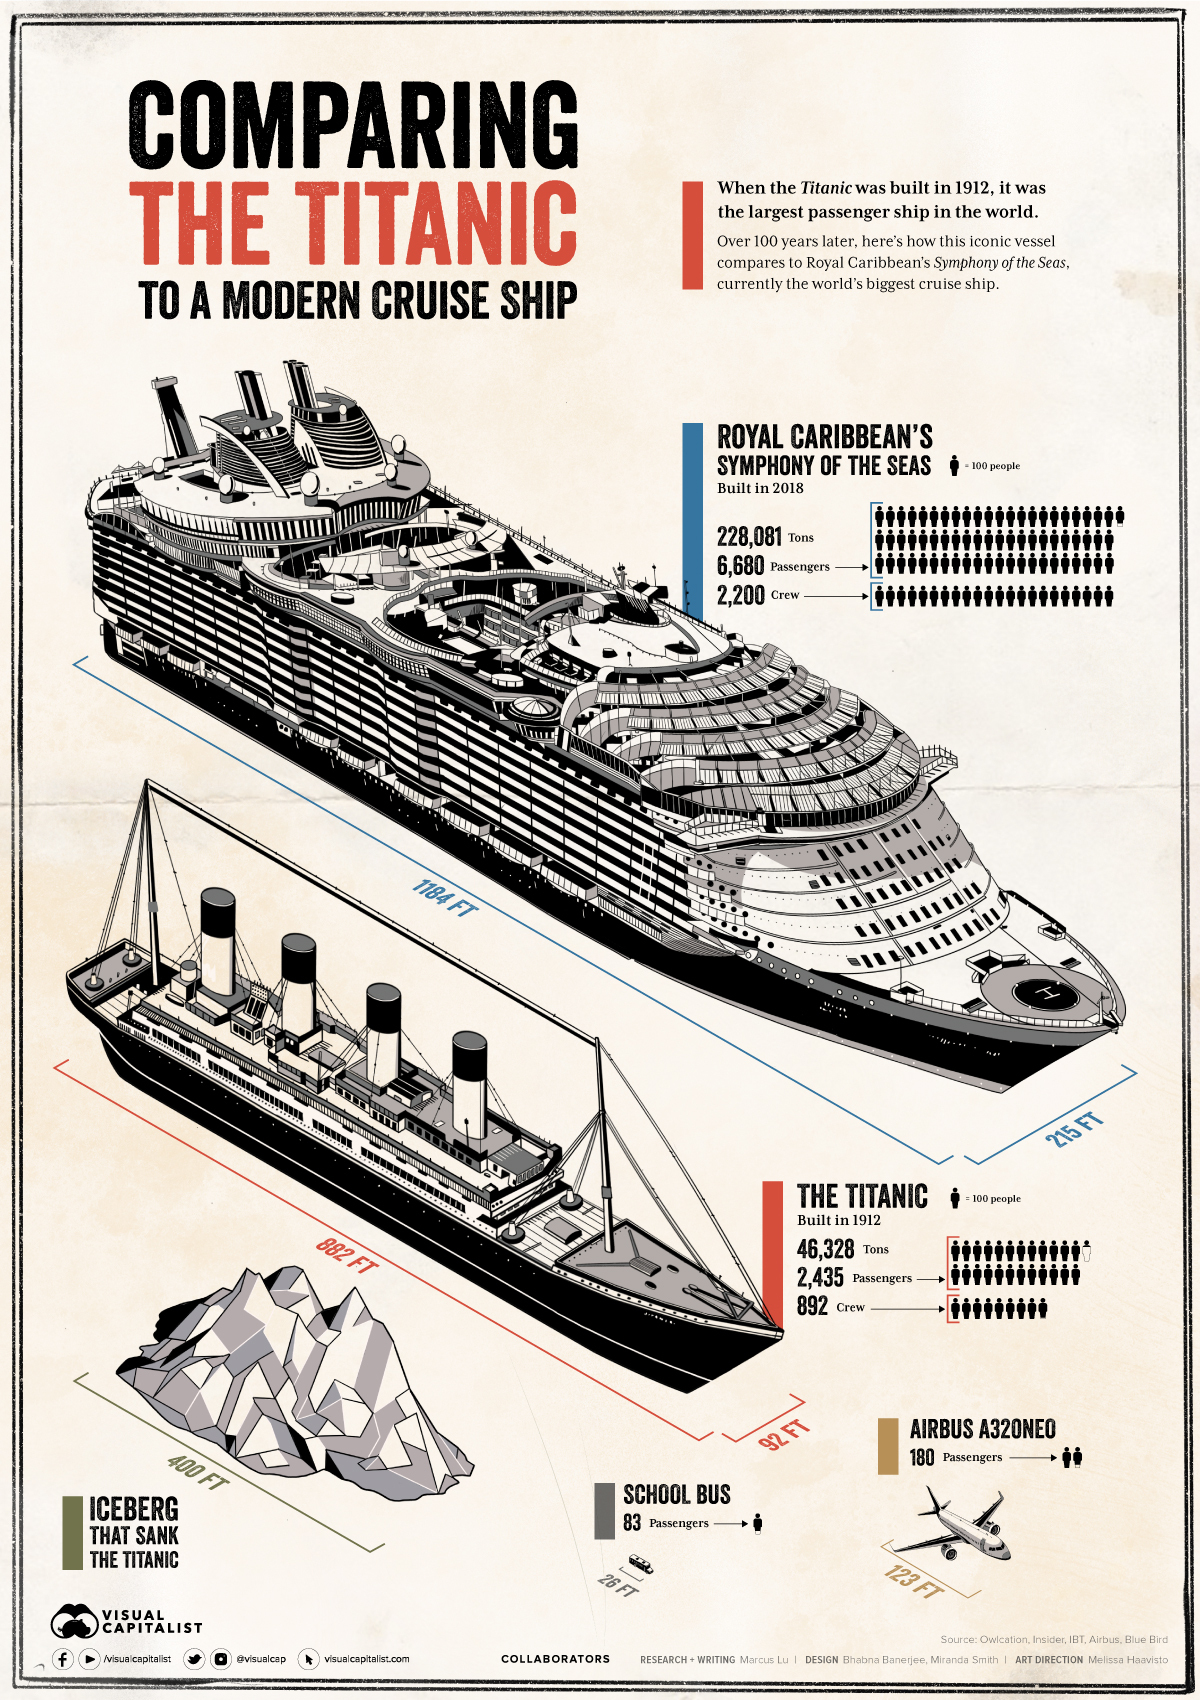 The Titanic compared to The Symphony of the Seas